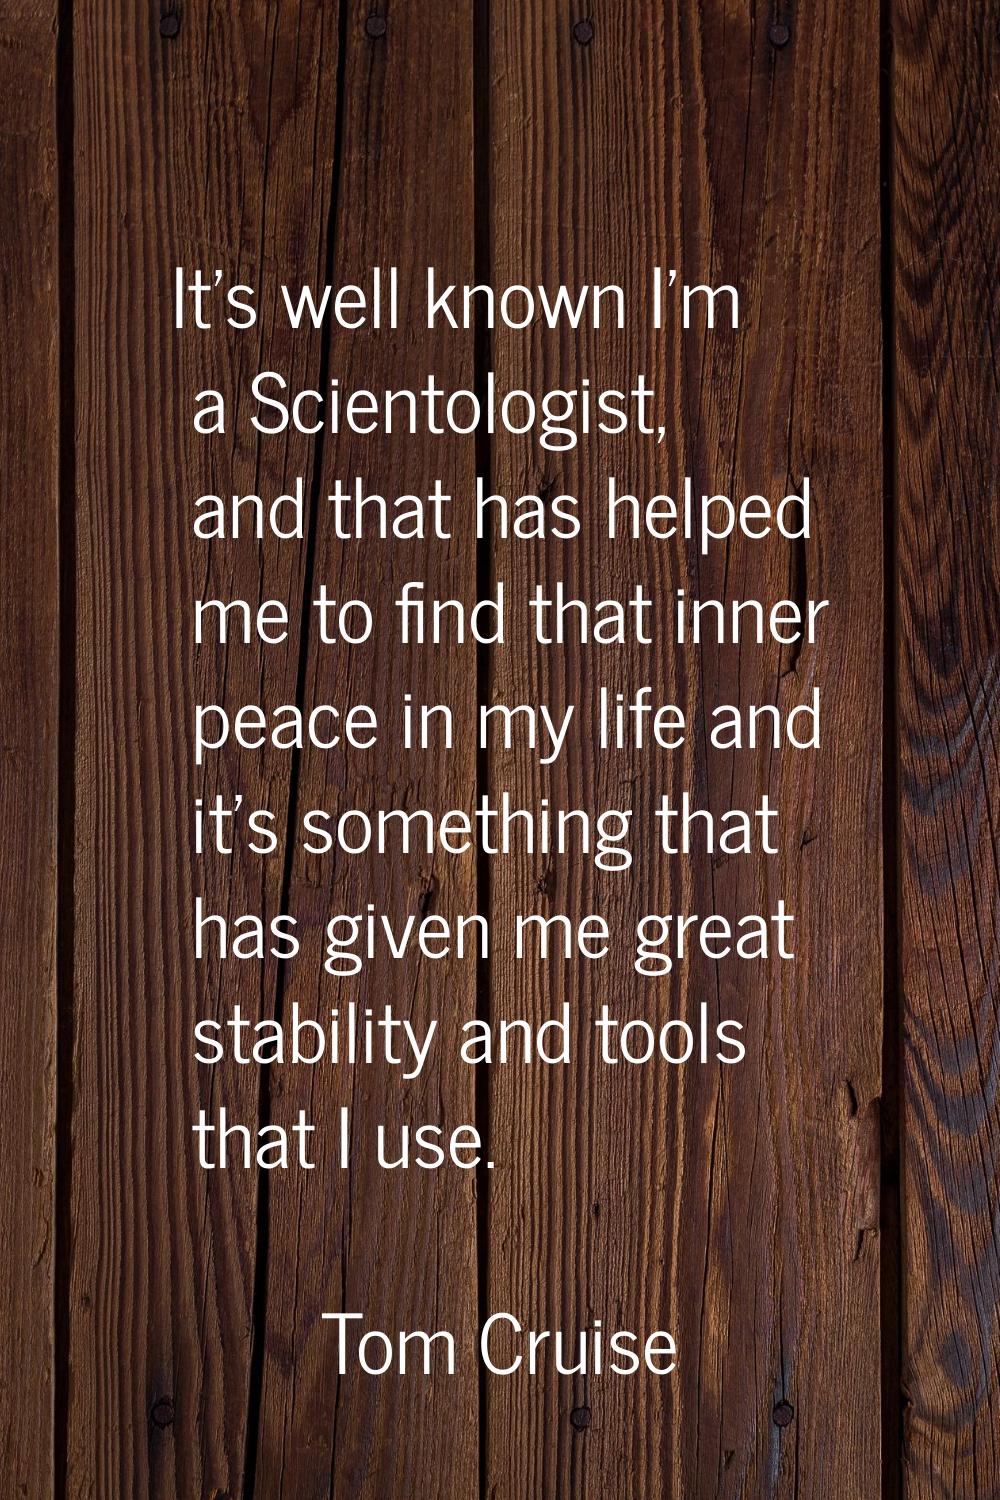 It's well known I'm a Scientologist, and that has helped me to find that inner peace in my life and